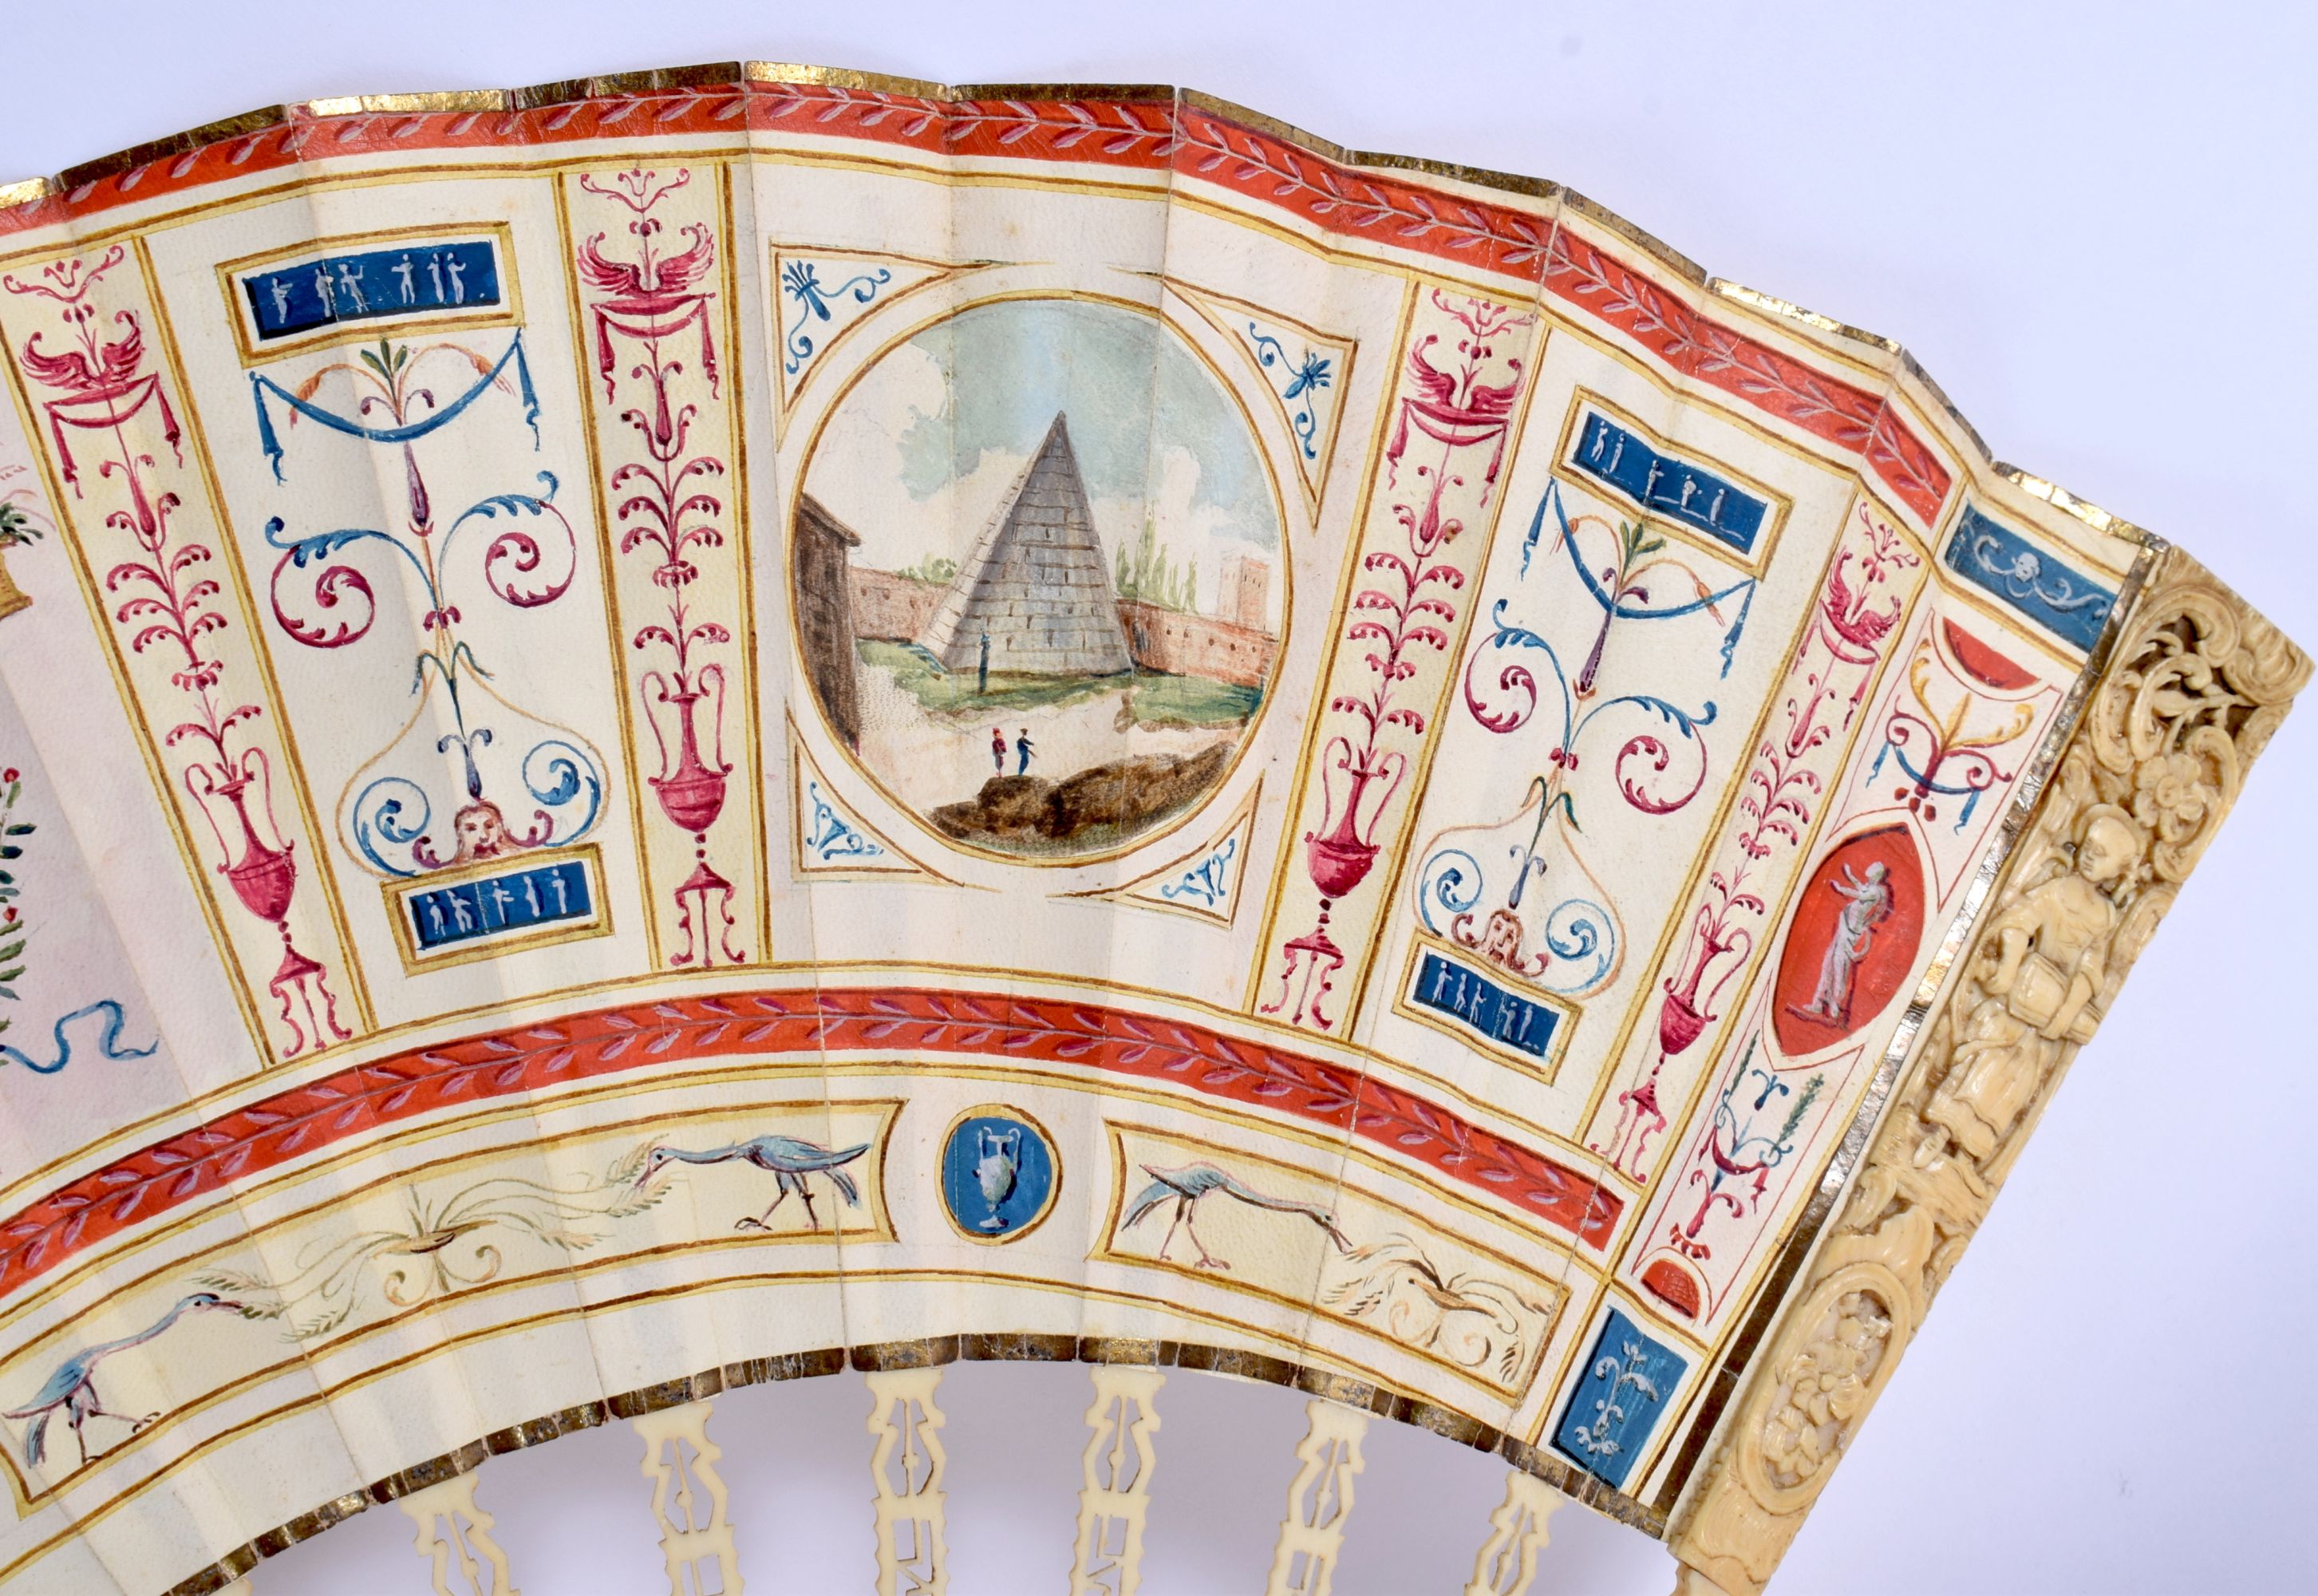 A FINE LATE 18TH CENTURY EUROPEAN GRAND TOUR TYPE FAN with paper leaf supports. 50 cm wide extended. - Image 4 of 5